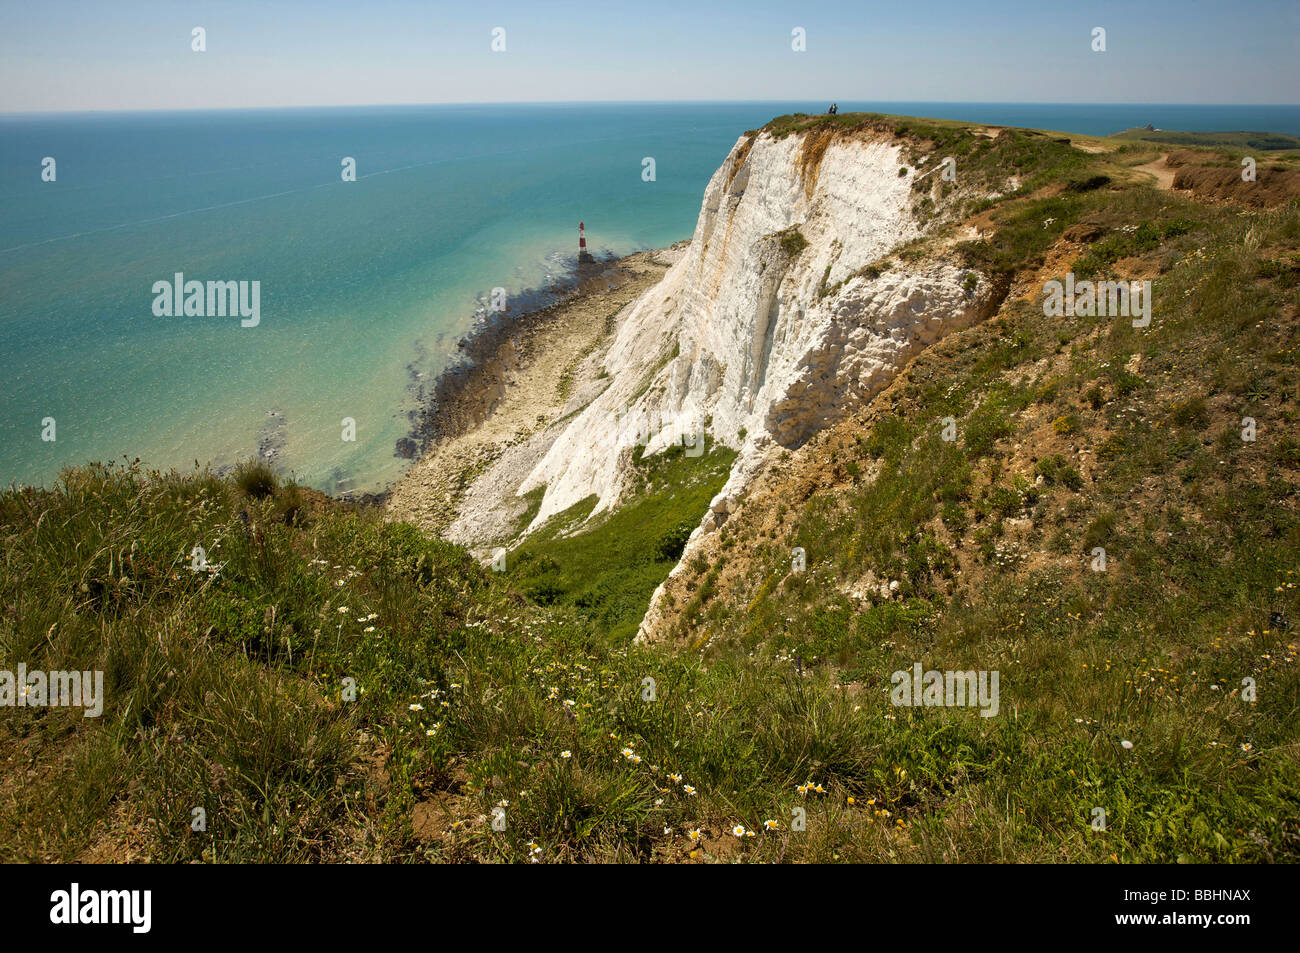 The clifftop at Beachy Head a notorious suicide spot as well as a famous Uk beautyspot. Stock Photo